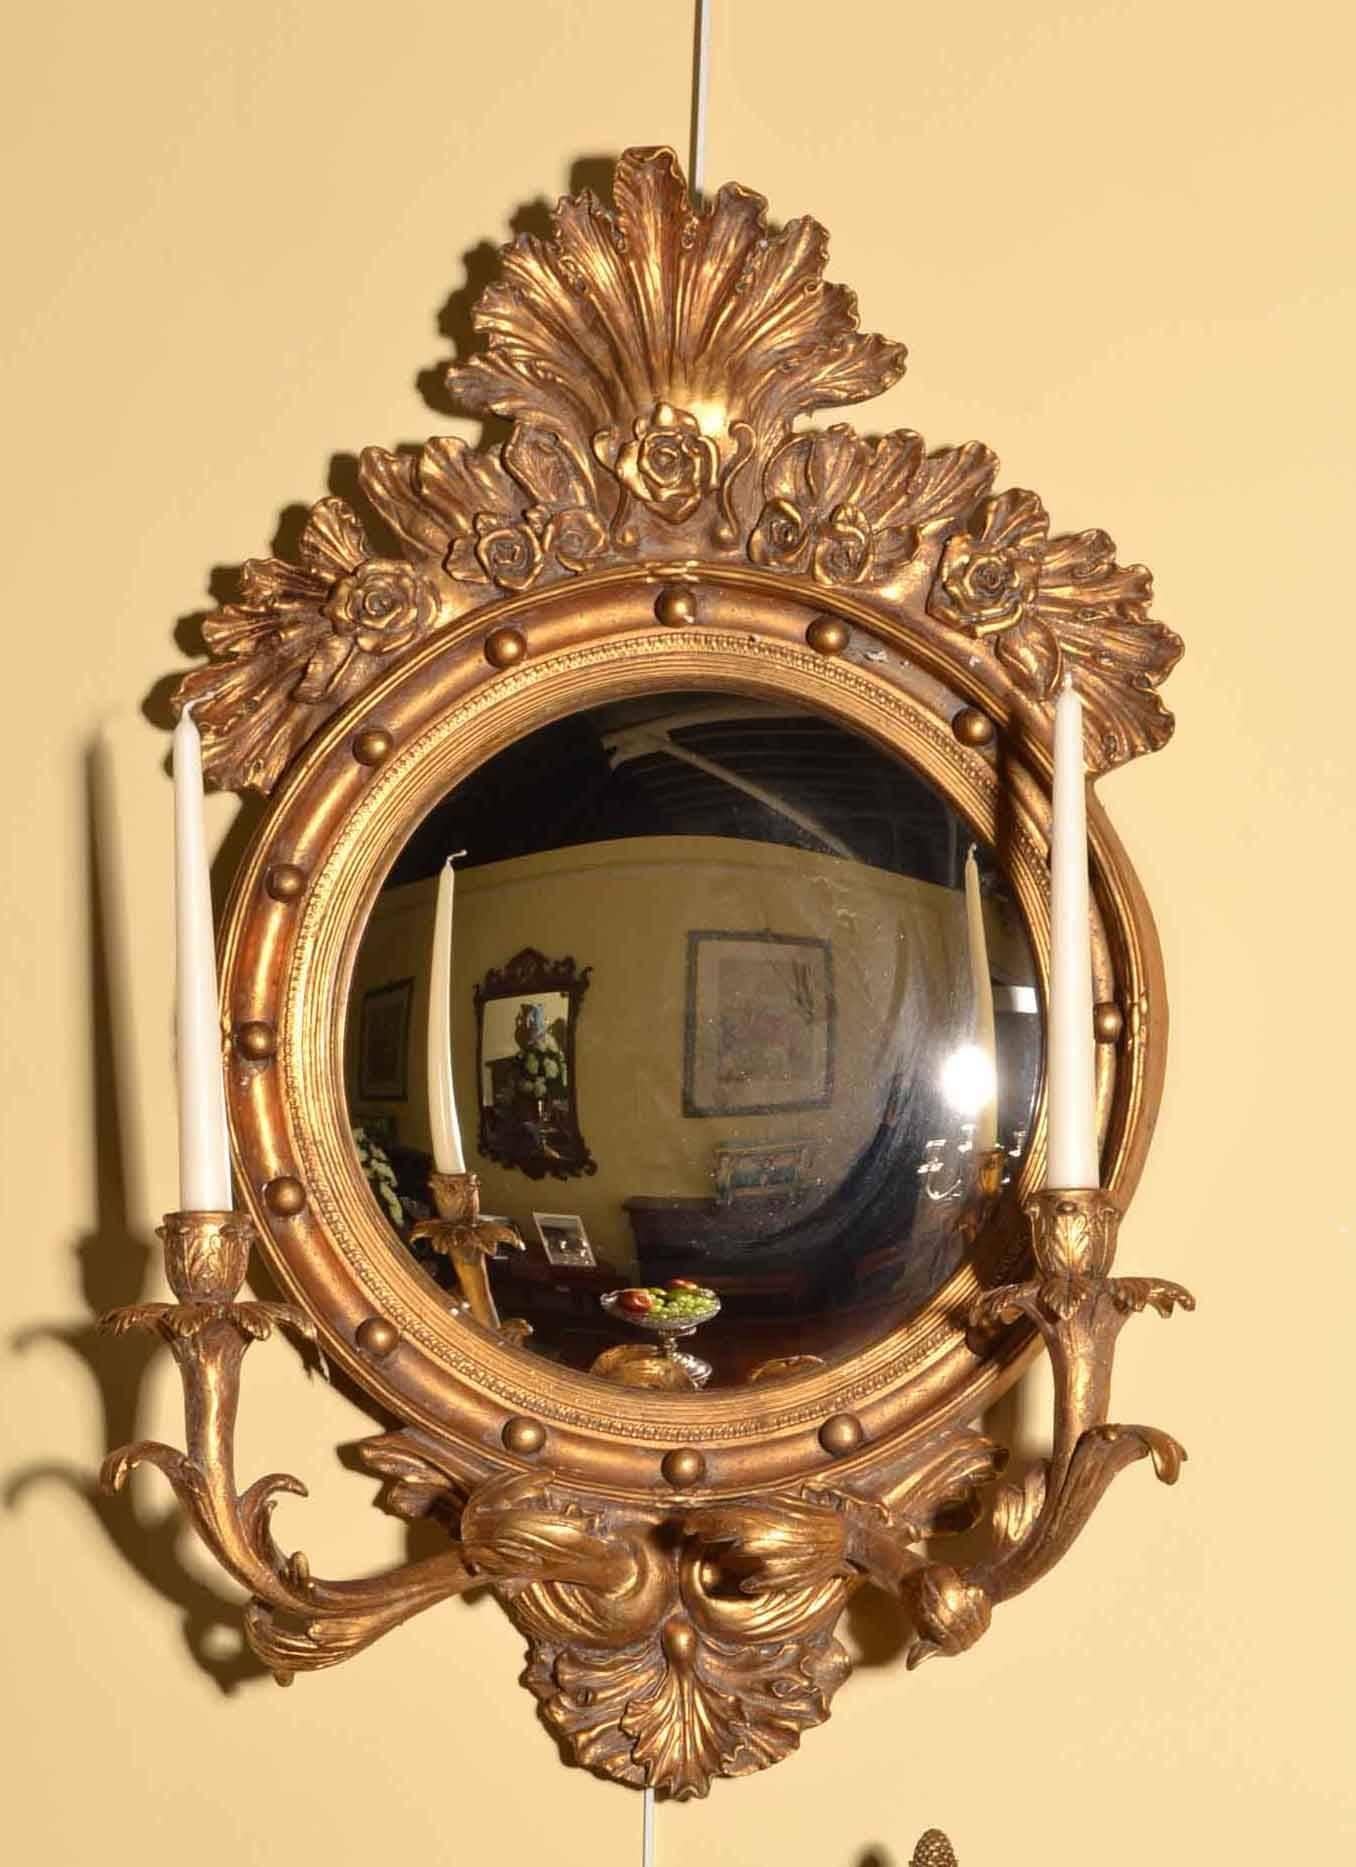 This is a beautiful and highly decorative pair of Italian gilt mirrors each with two candleholders, dating from the last quarter of the 20th century. 

They have convex mirrors and a beautiful antiqued finish.

The quality and craftsmanship is